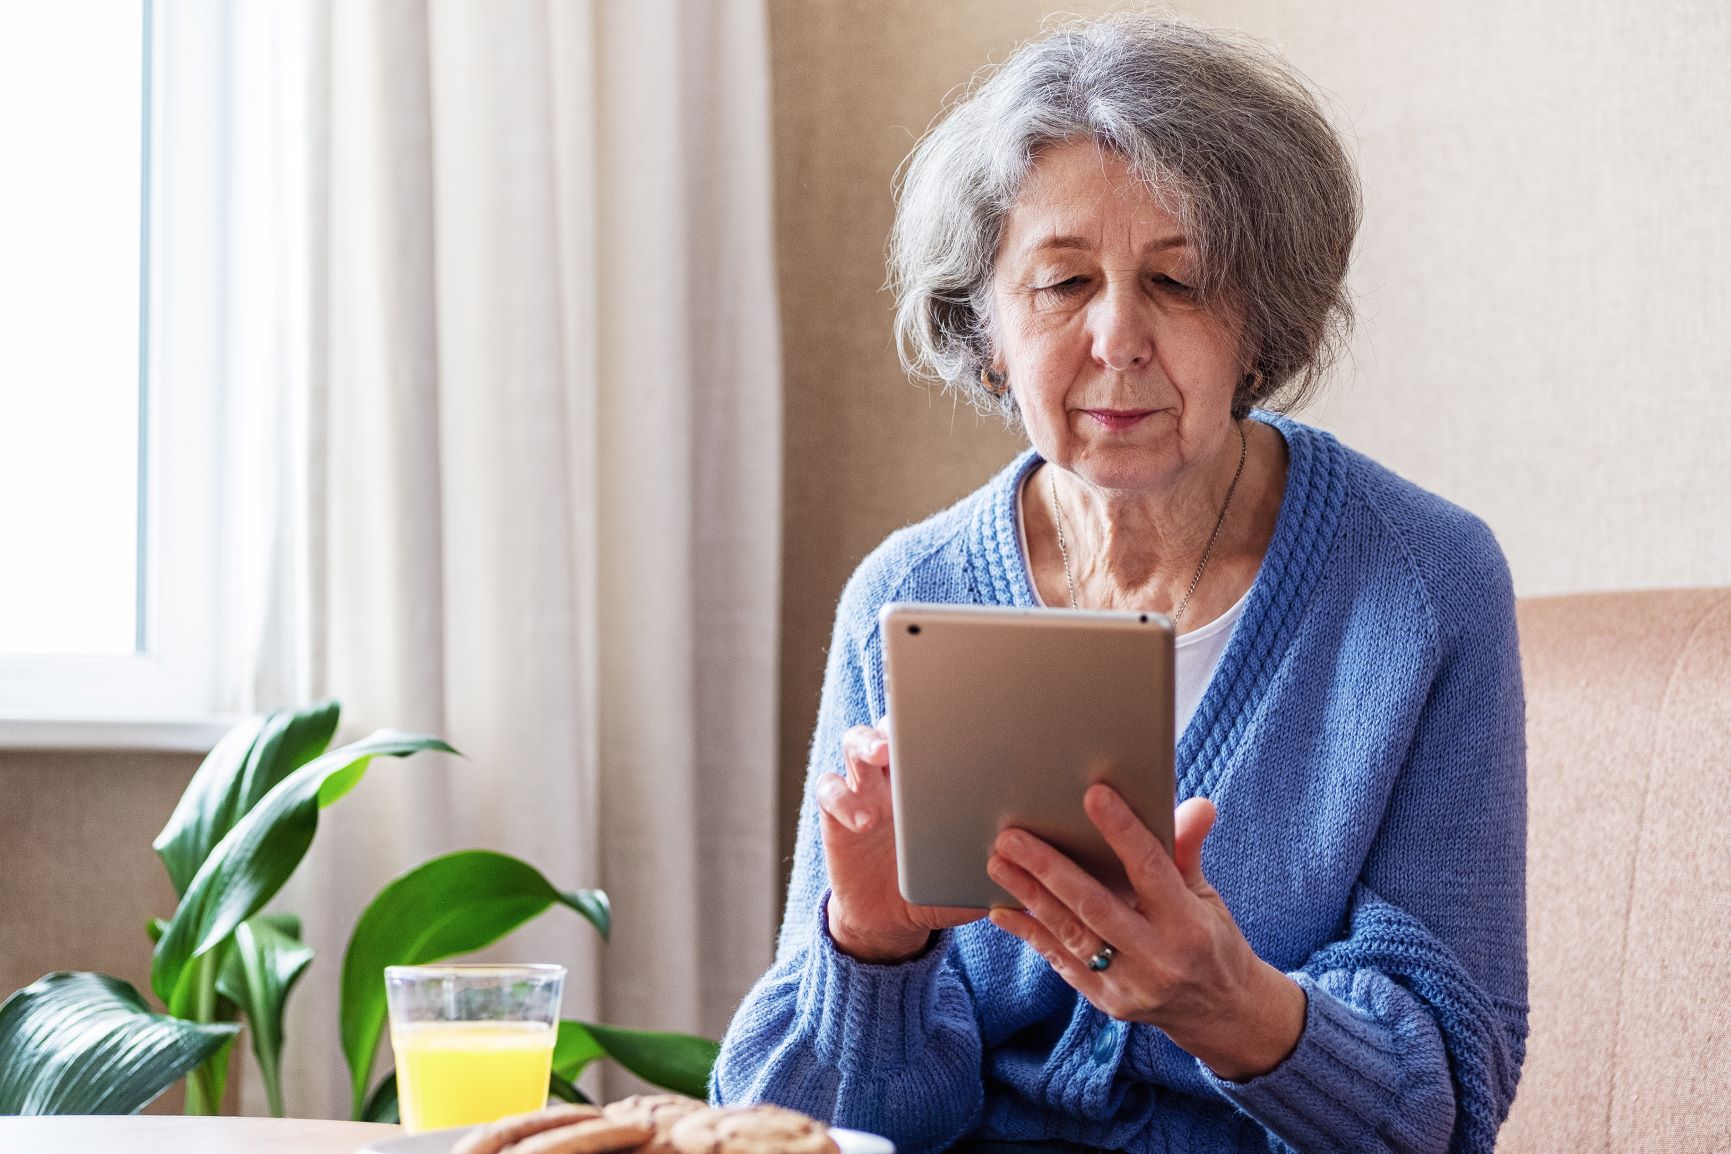 An elderly woman uses a tablet to view content on social networks